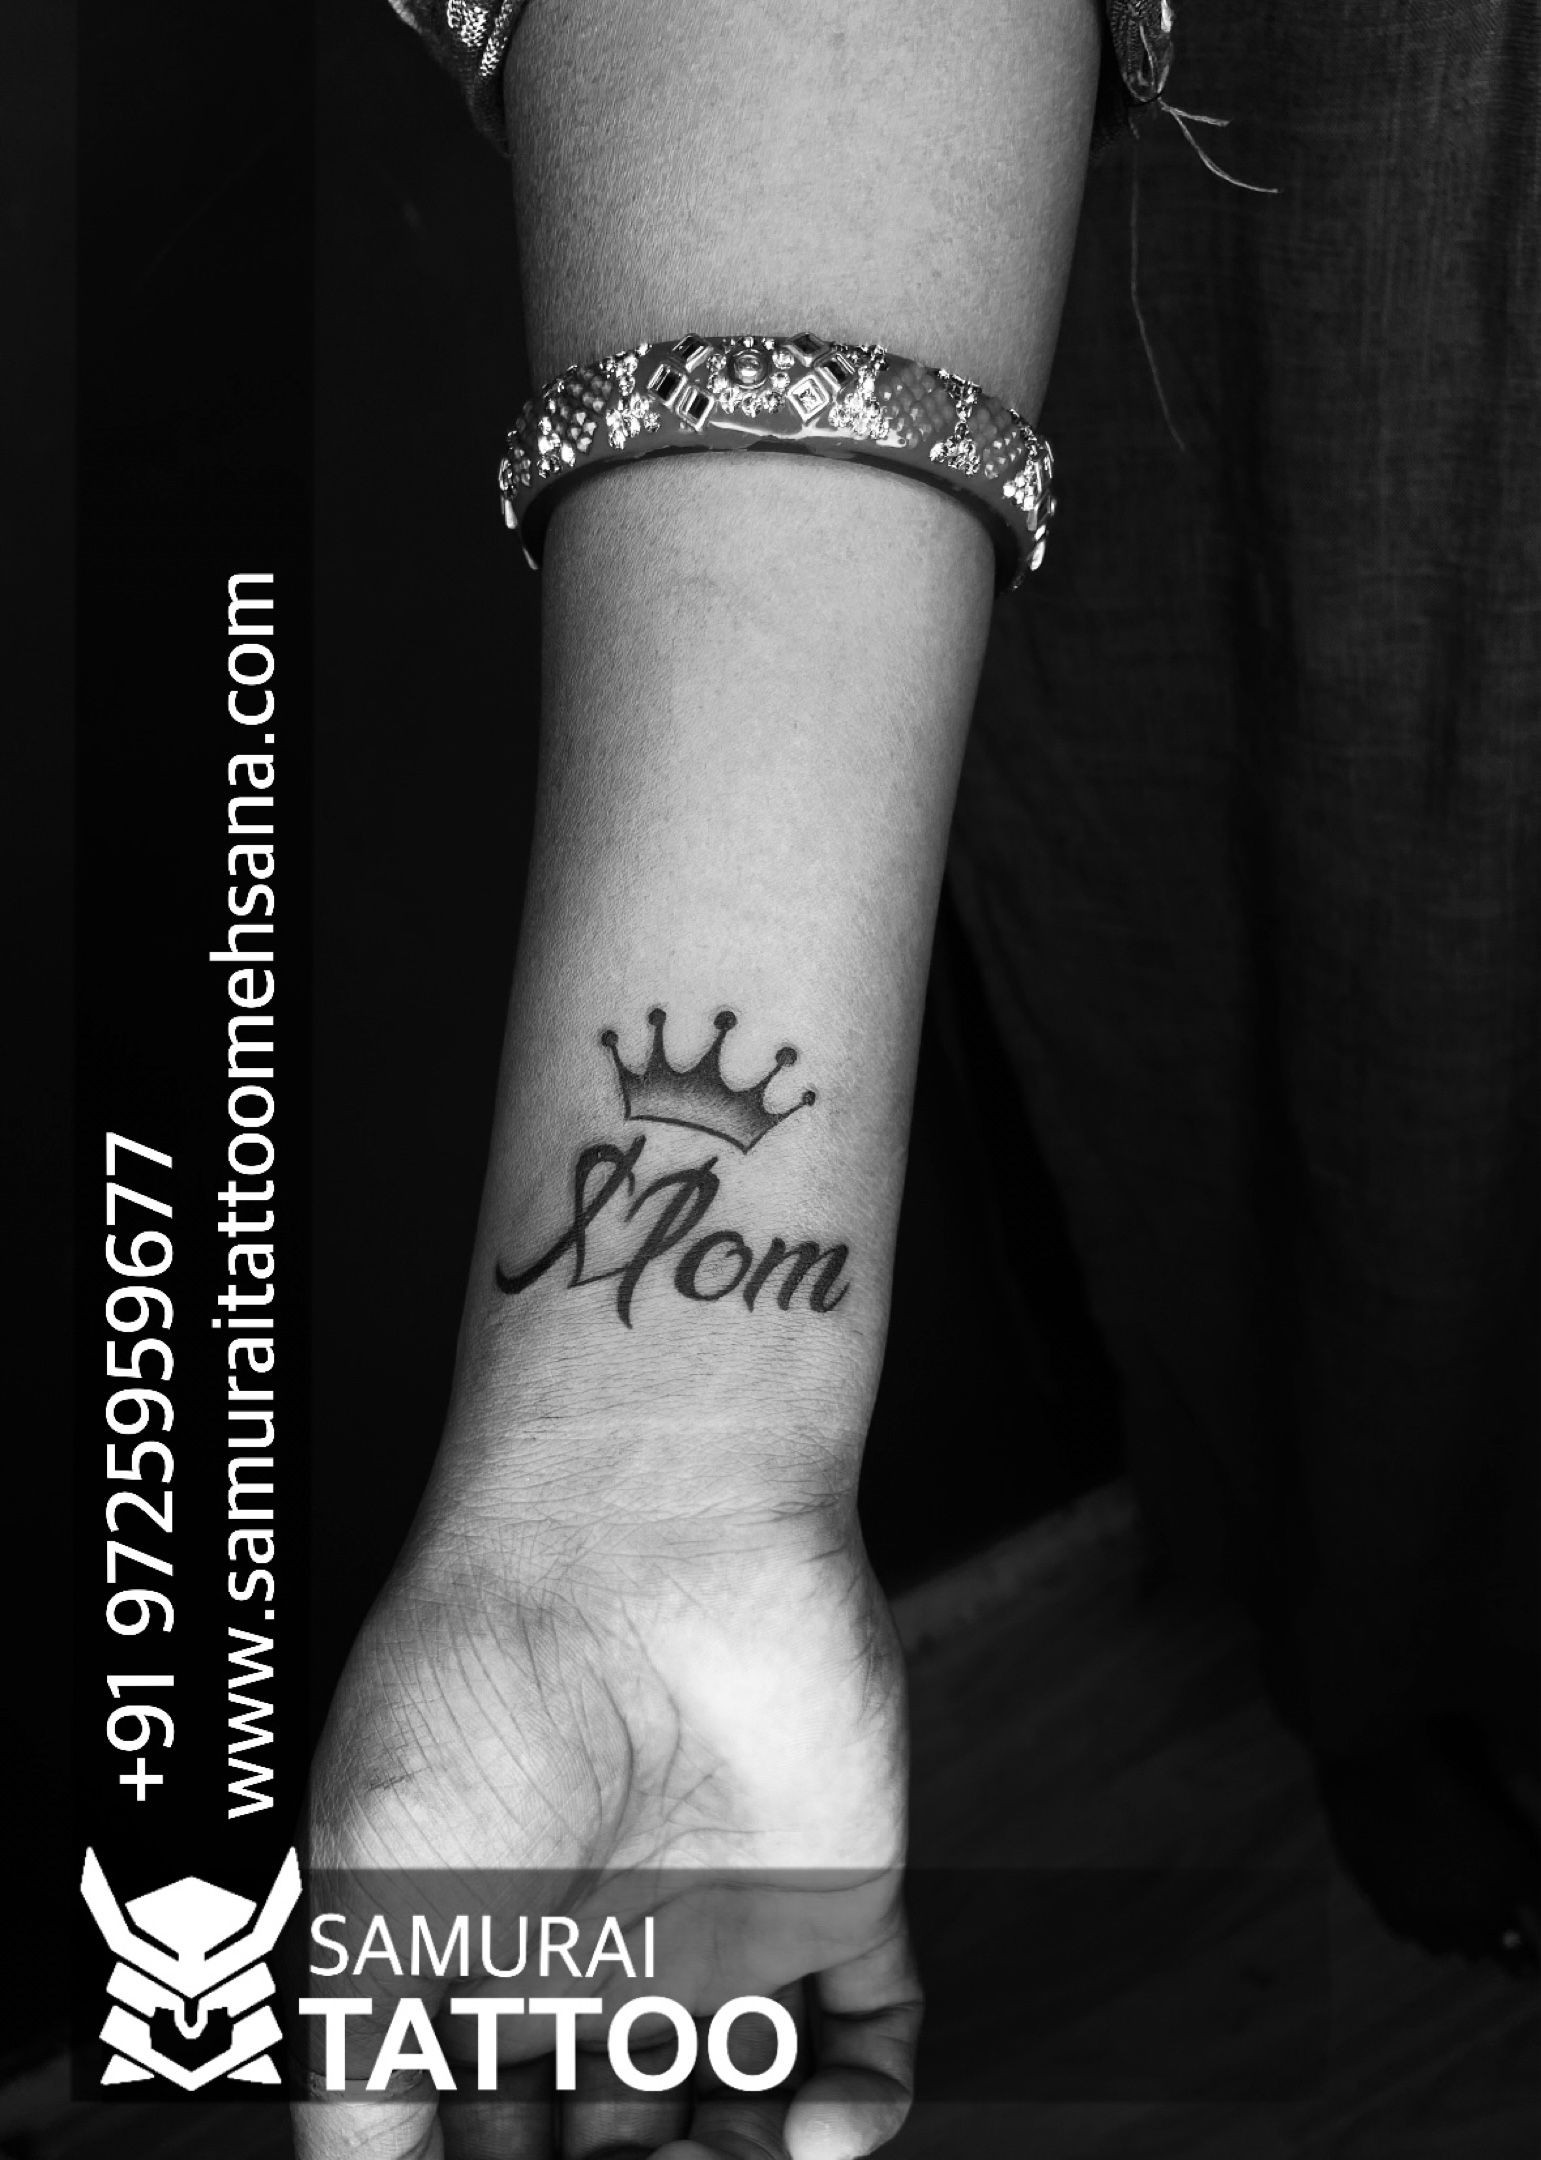 Tattoo uploaded by Vipul Chaudhary • Tattoo for mom |Mom tattoo design |Mom  tattoo • Tattoodo